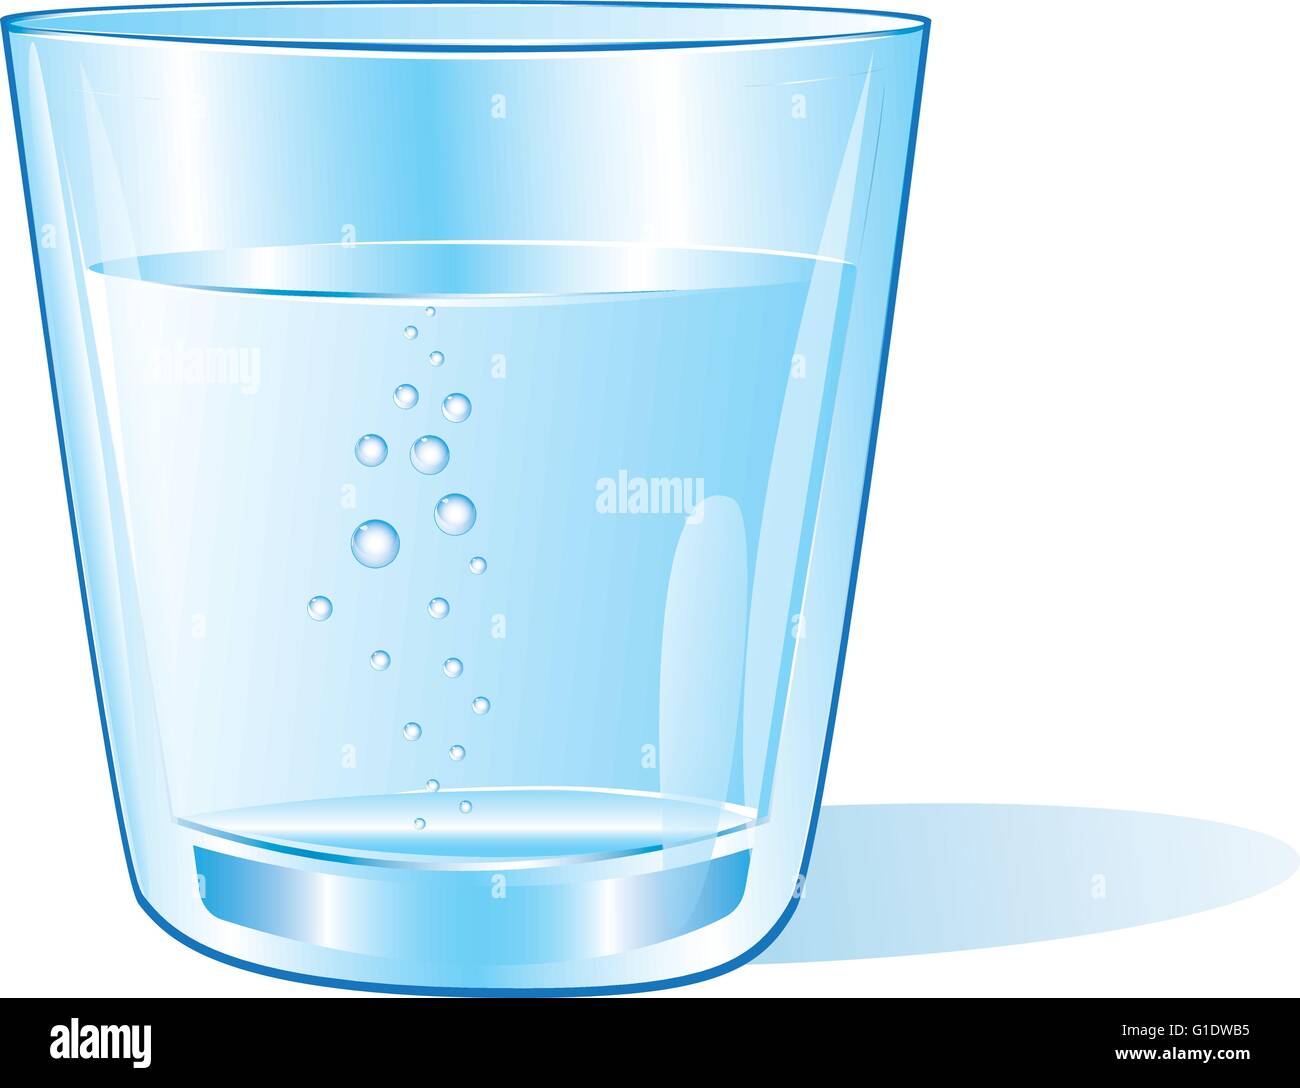 vector illustration of a glass of water Stock Vector